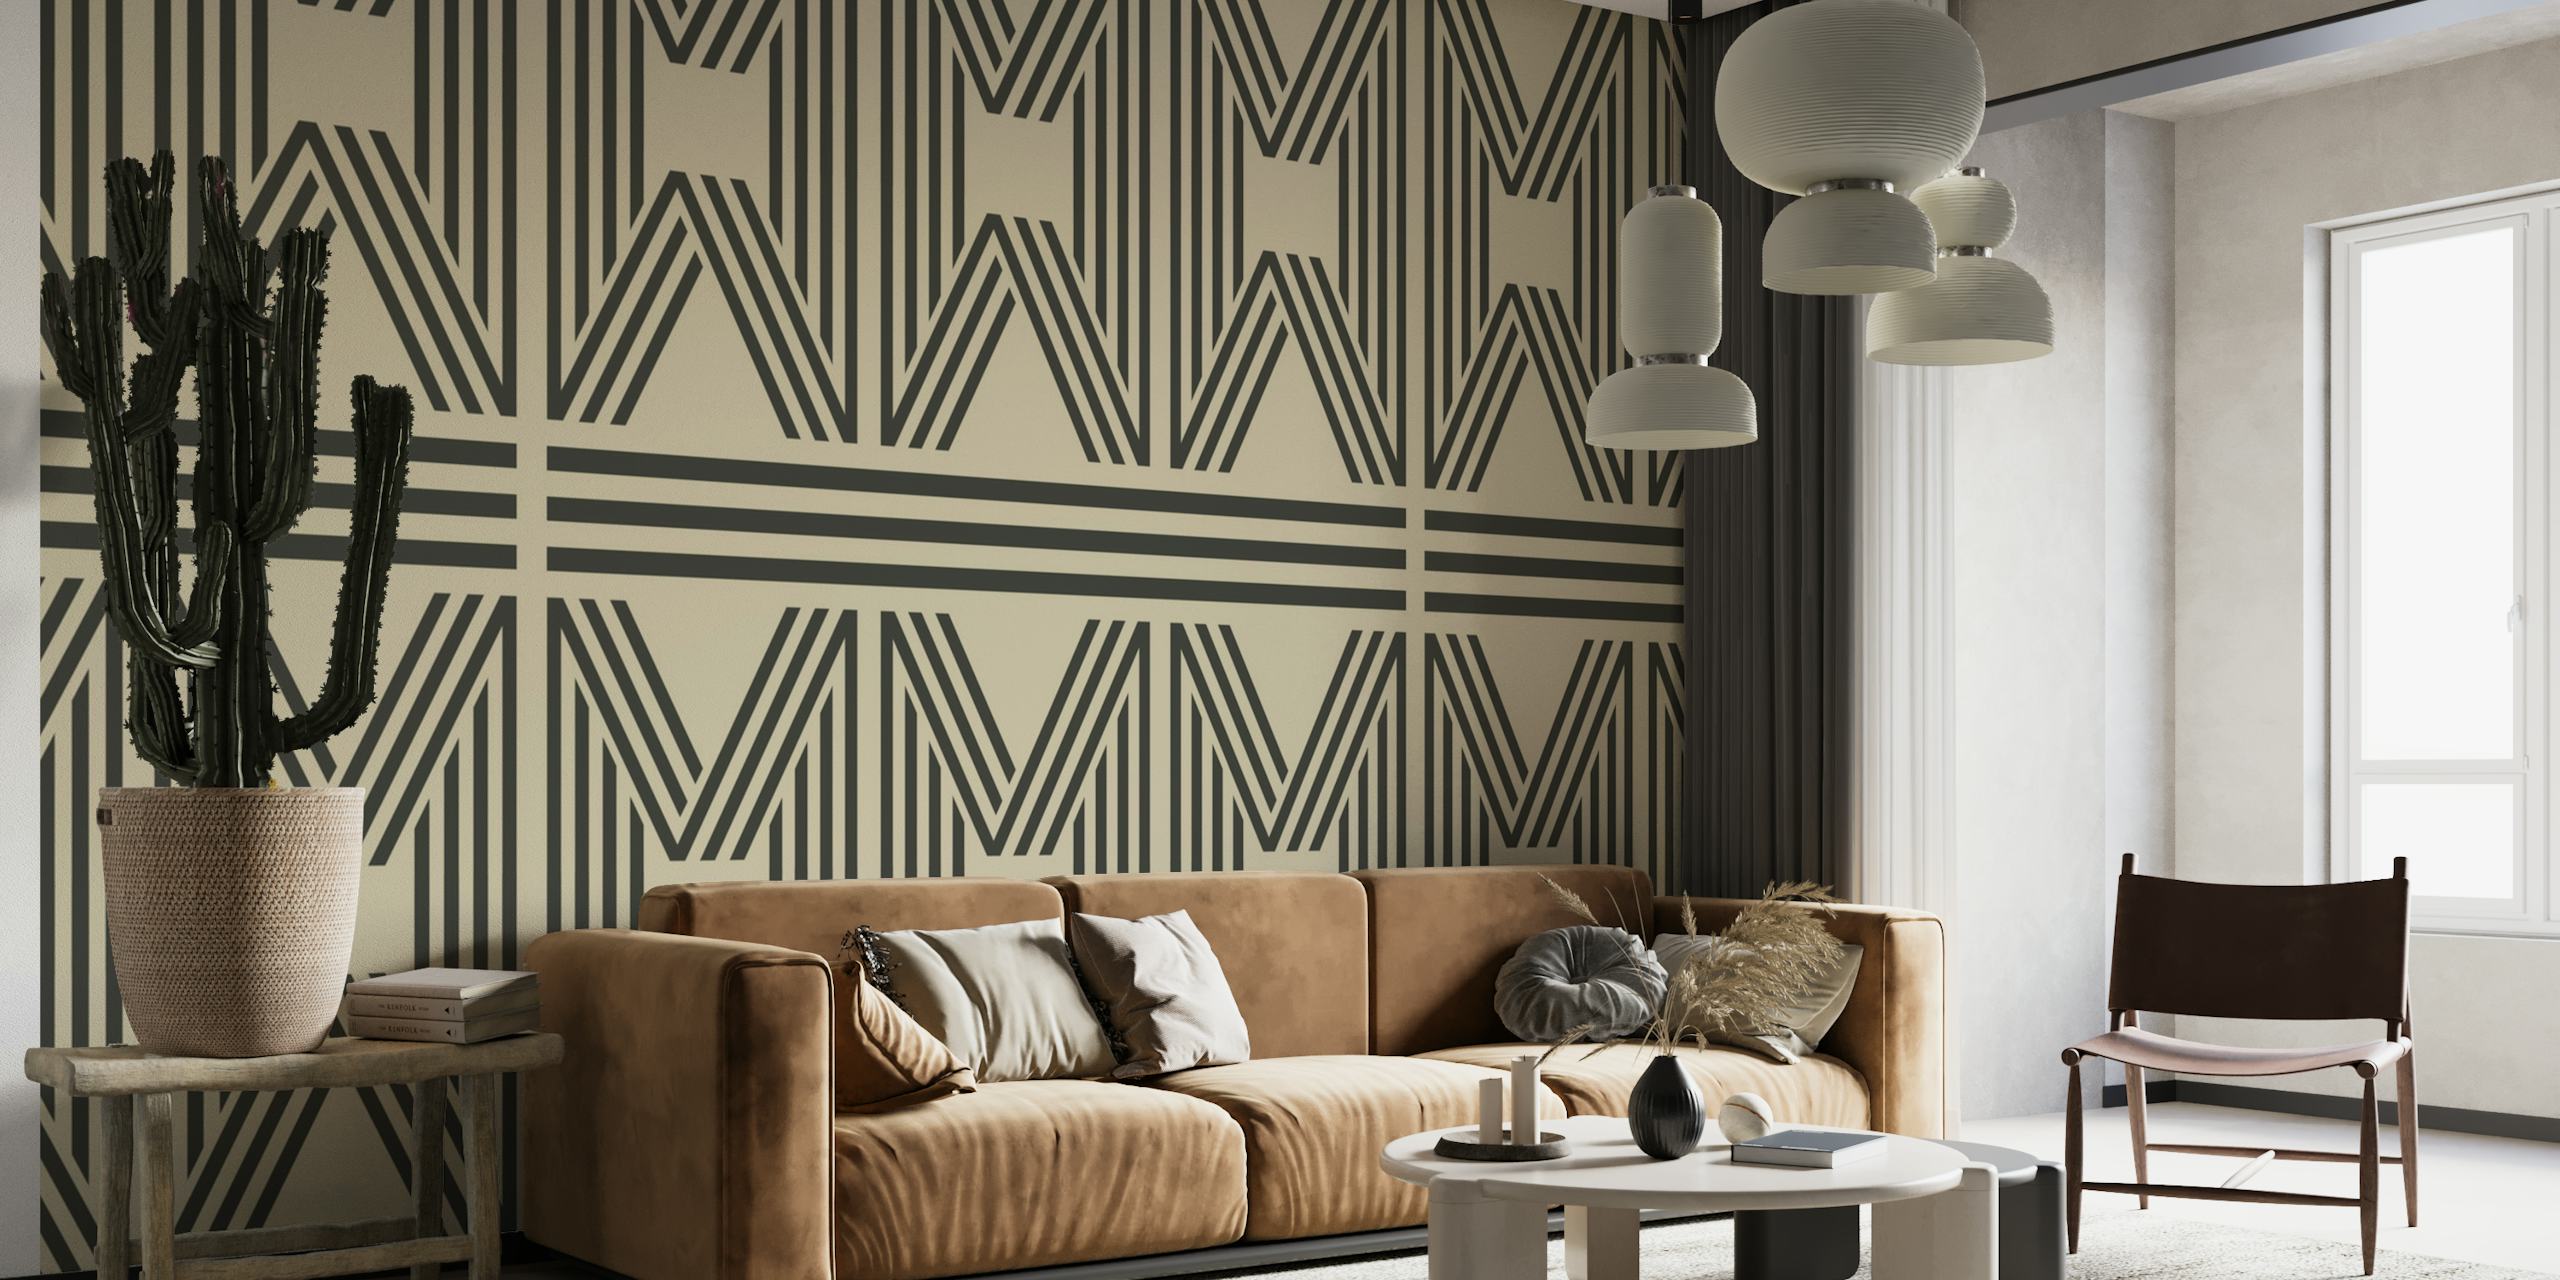 Abstract Minimalist Geometric Wall Mural in Beige and Black